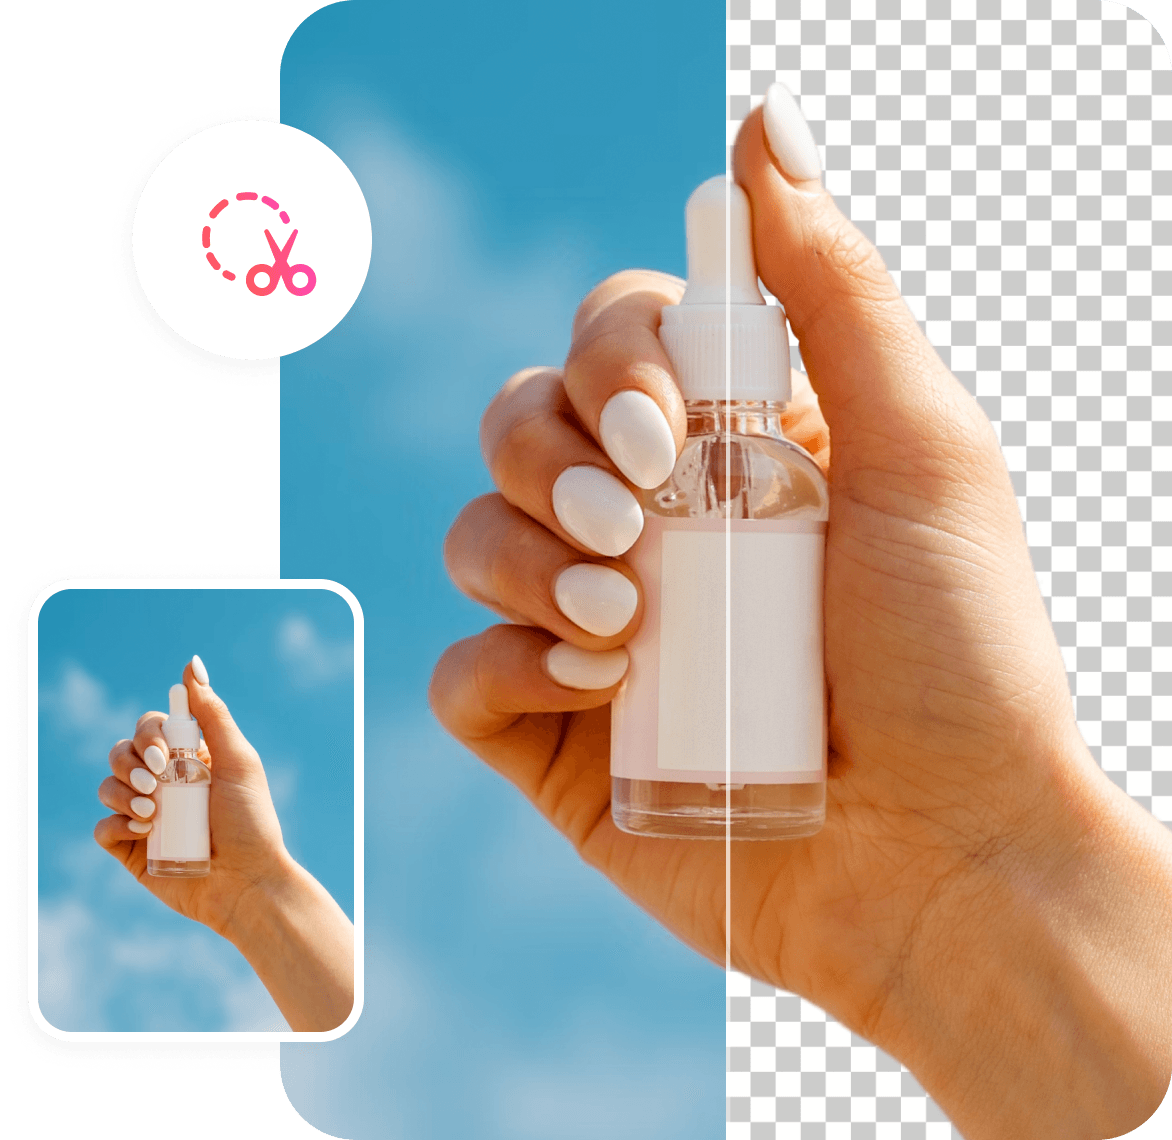 Background remover - remove.bg APK for Android - Download